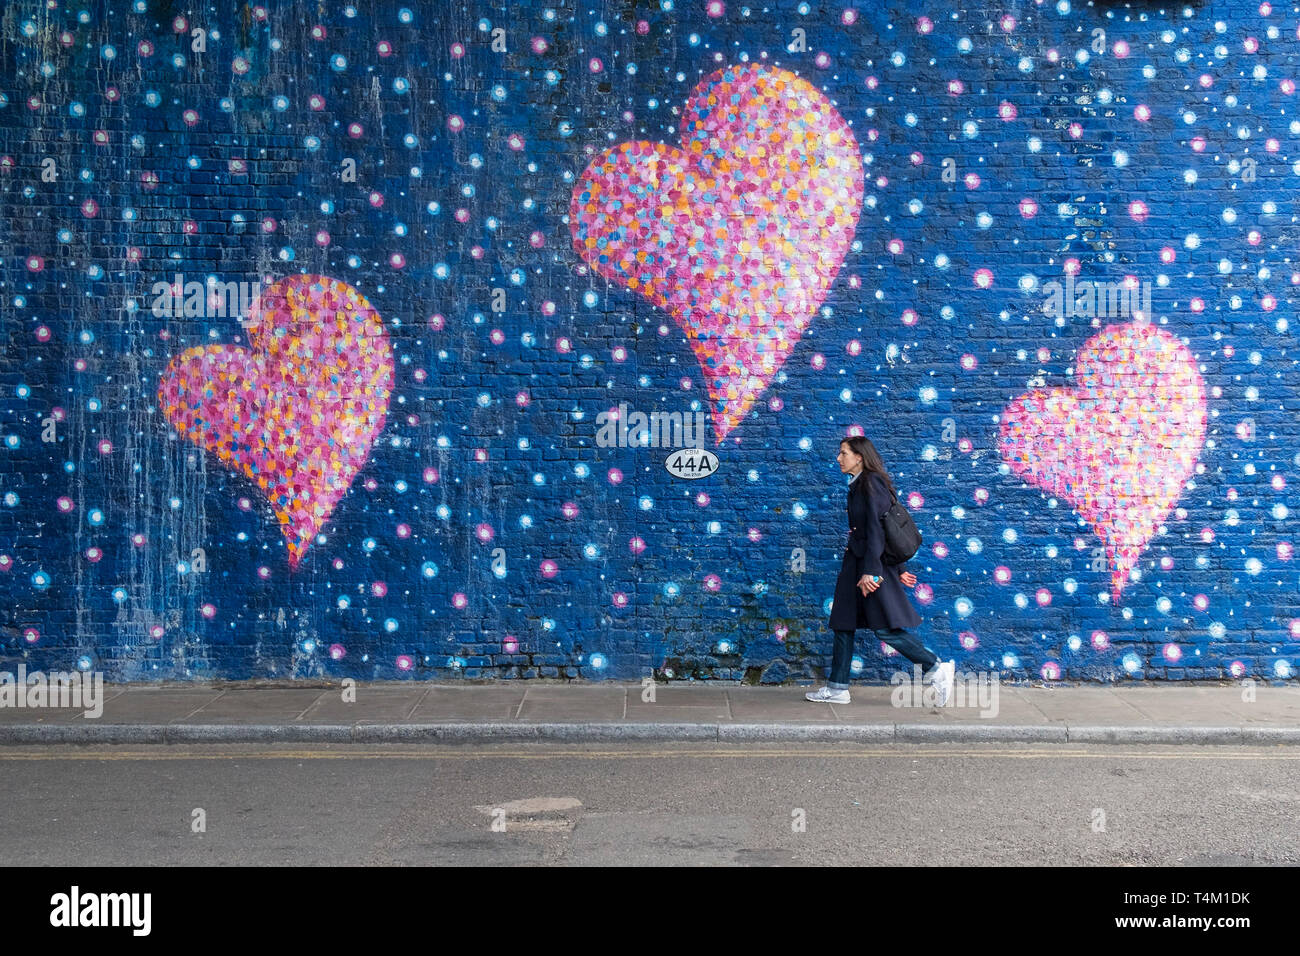 A woman walking along a street next to a wall covered in a painted mural of colourful bubbles and hearts. Stock Photo